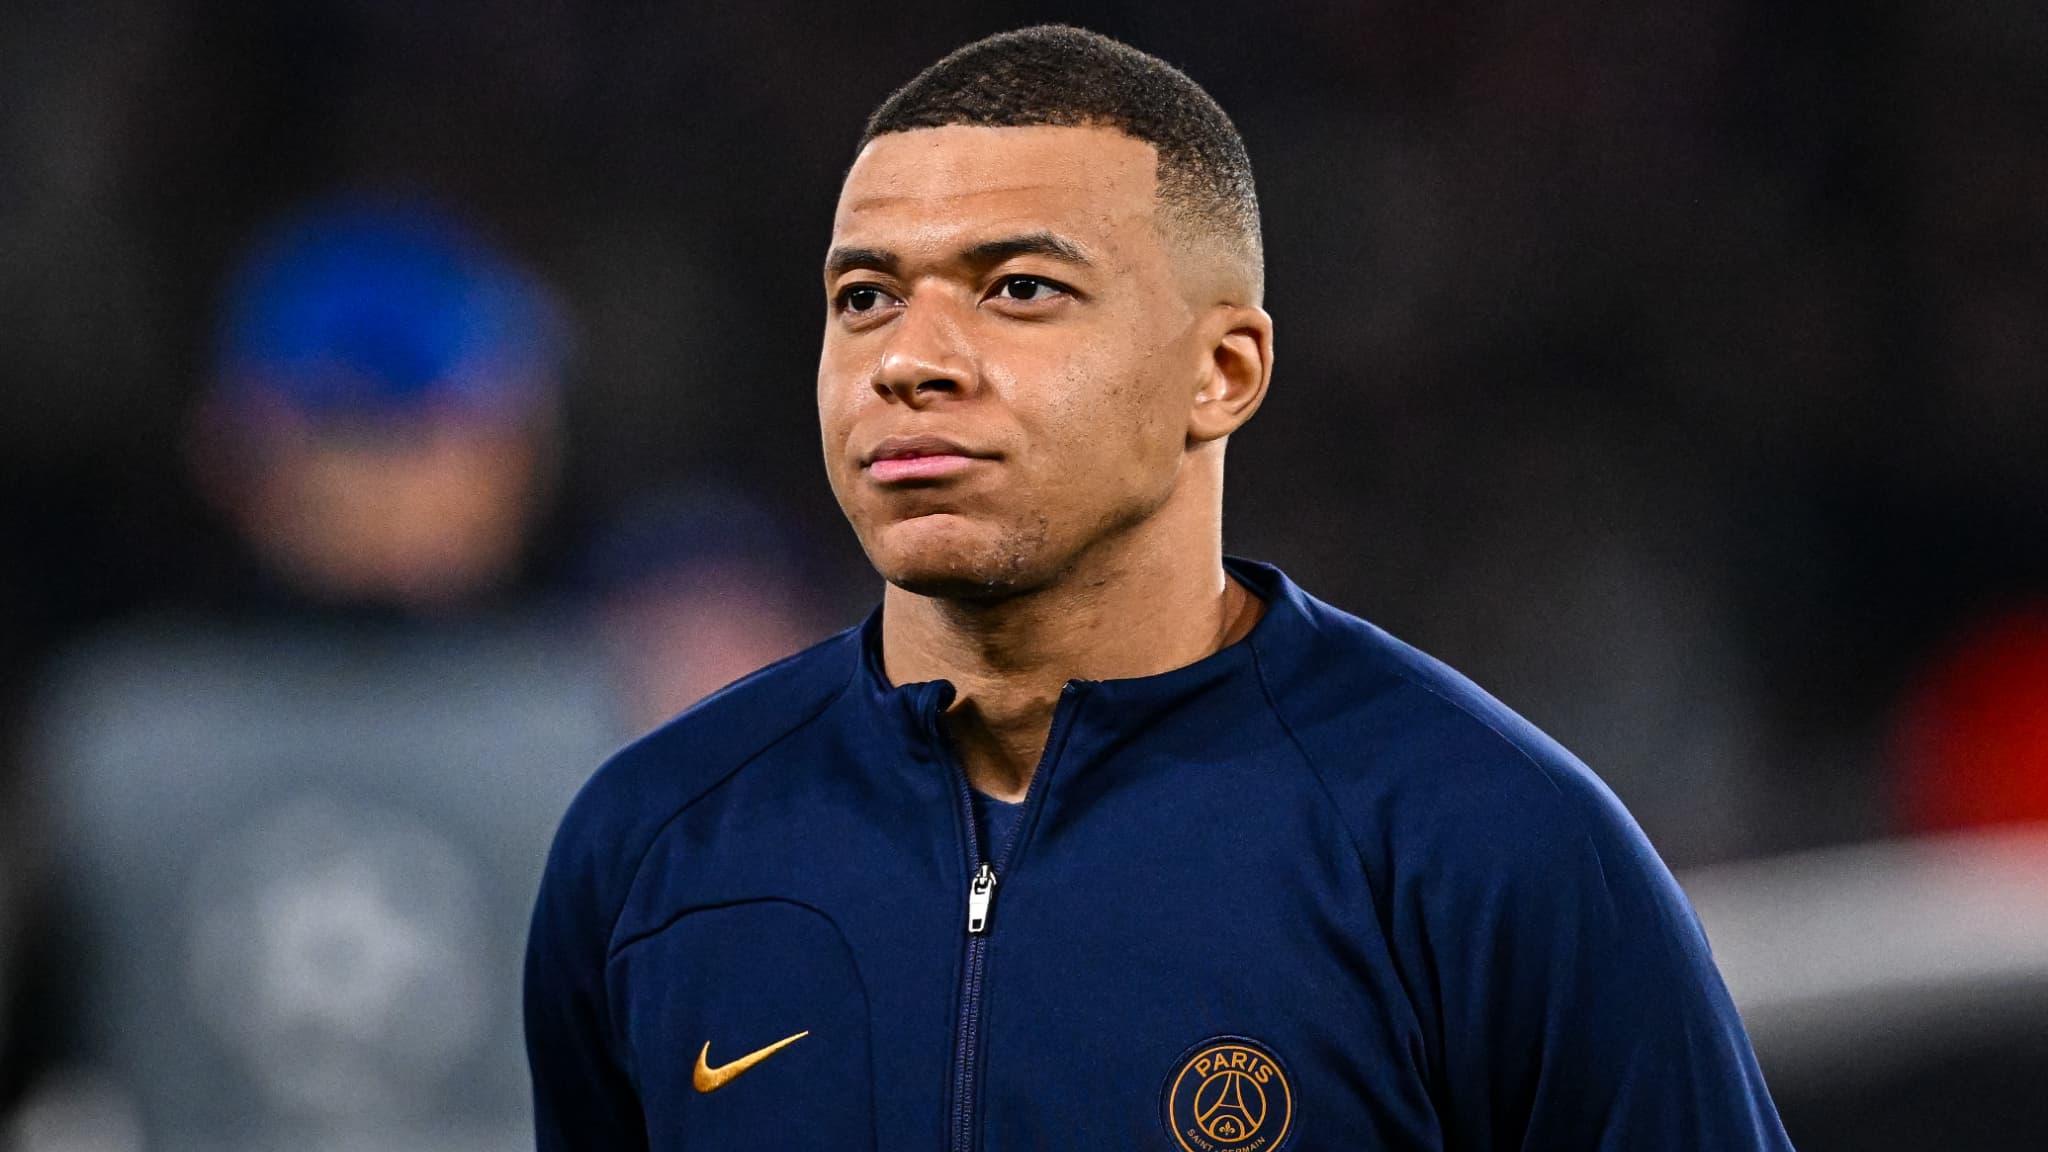 the confidence of Kylian Mbappé’s father to Emmanuel Macron about the Olympics